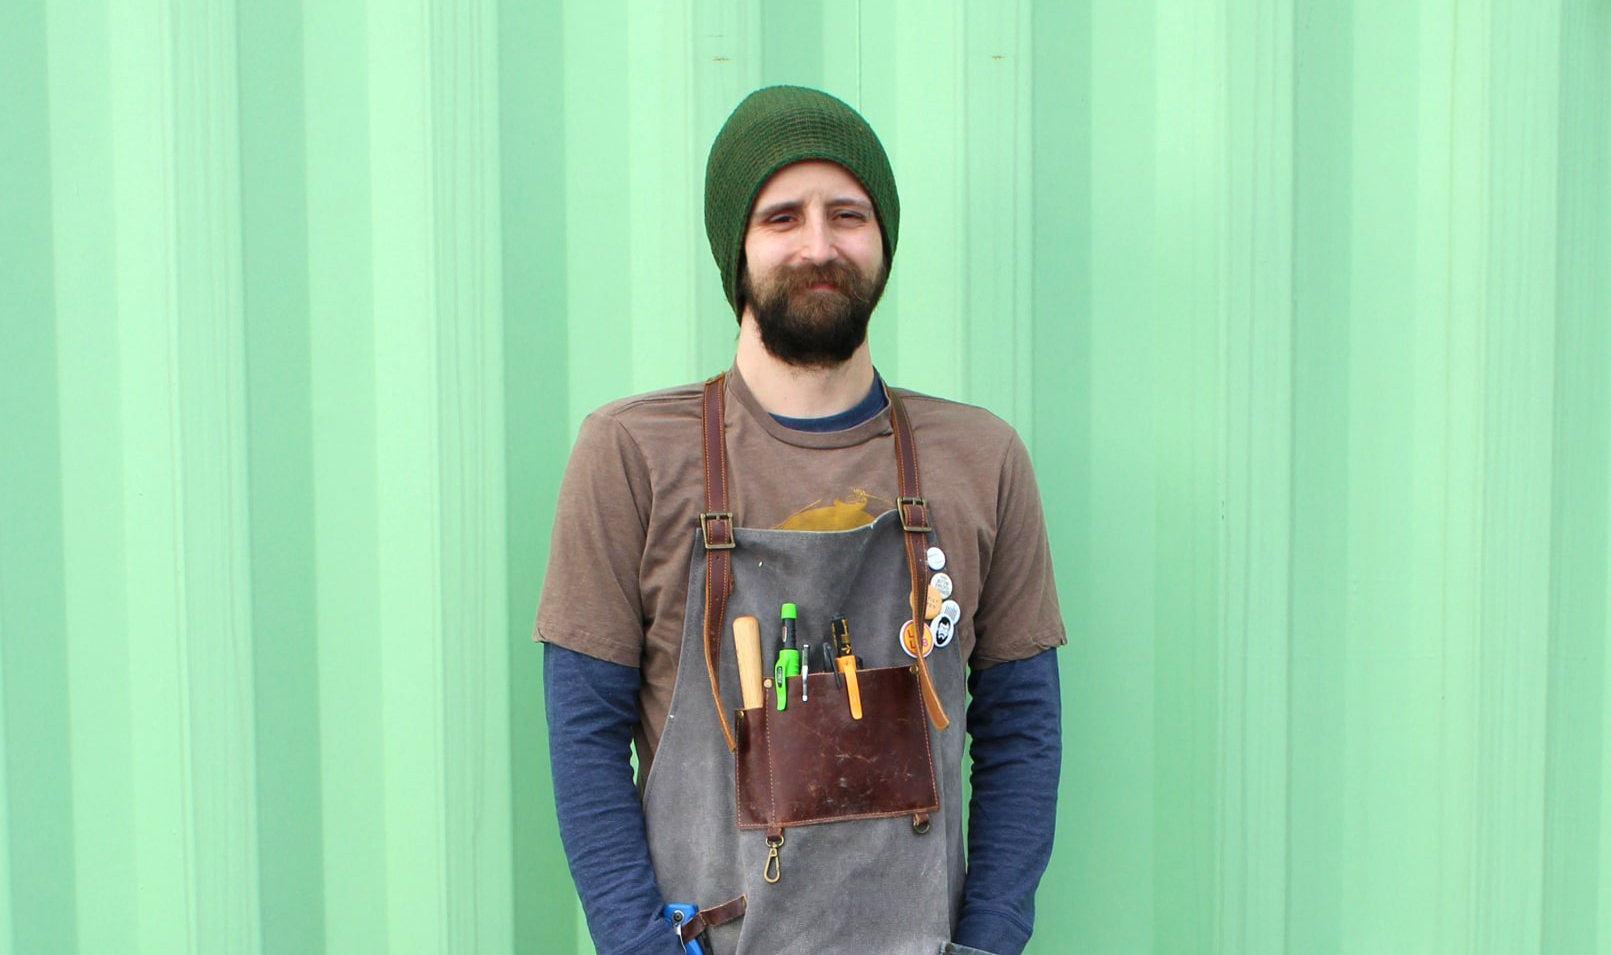 Meet Our Monthly Maker: Raymond Baccari